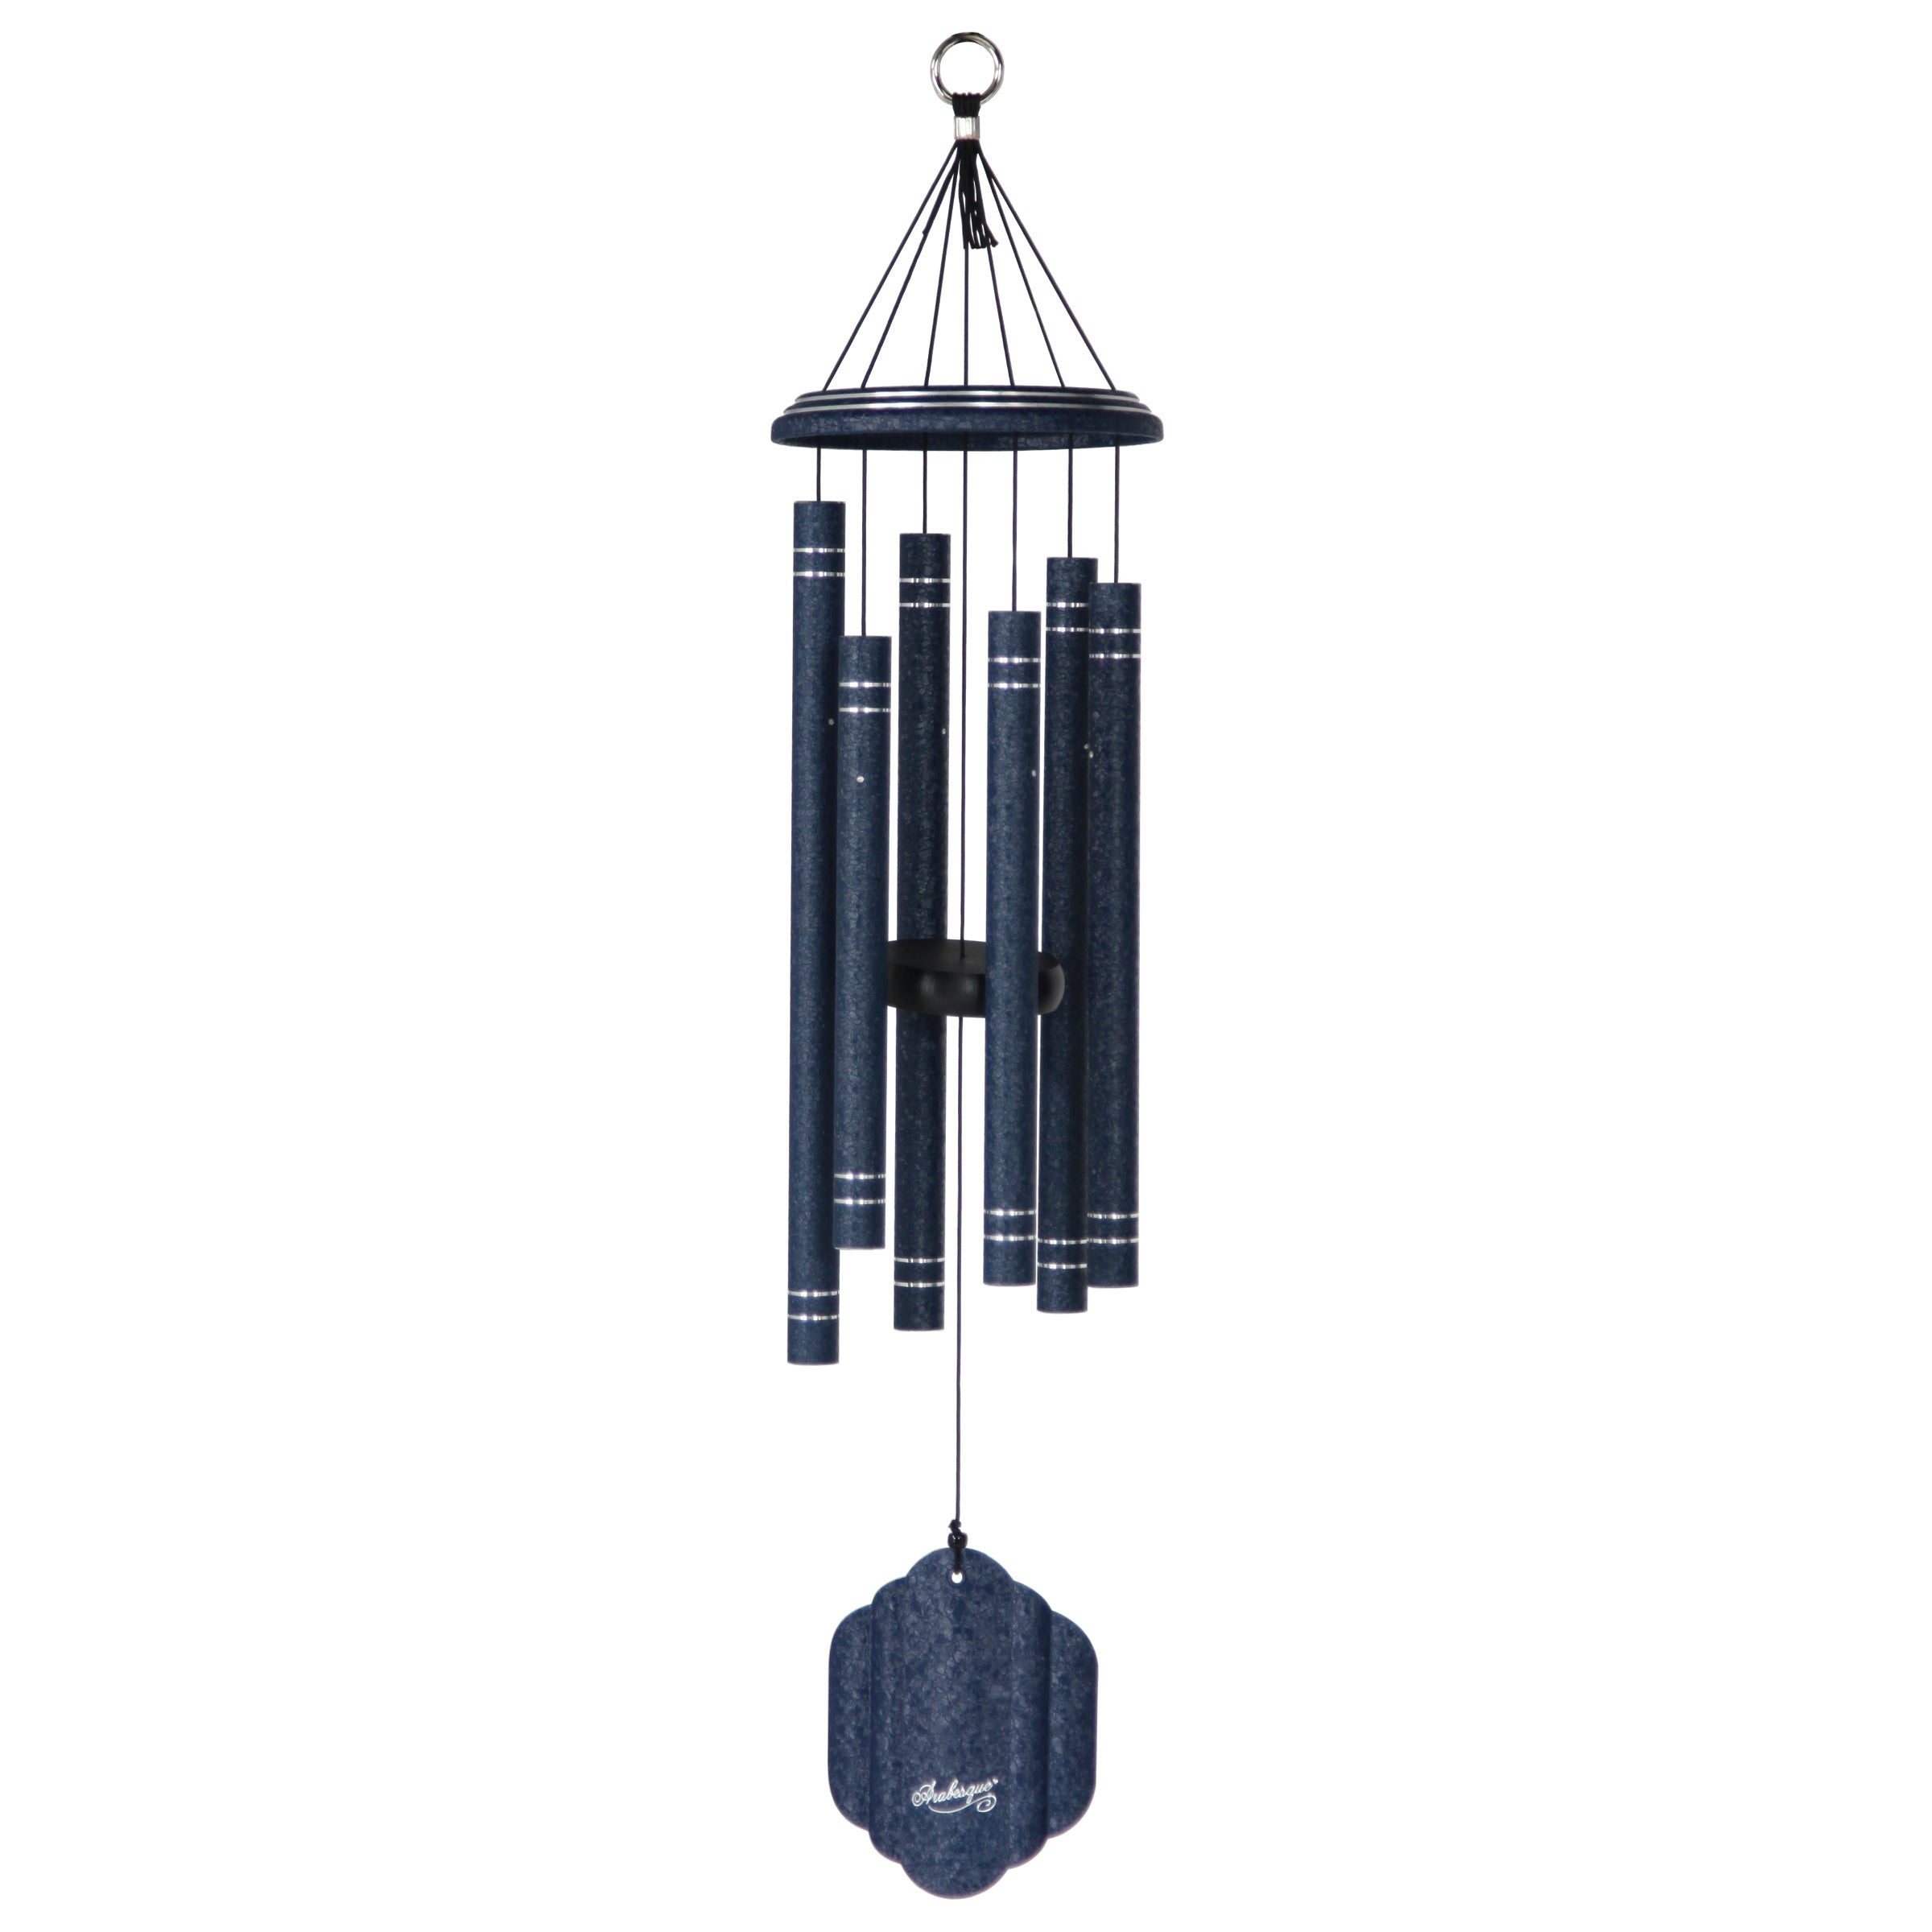 Wind River Arabesque ® 36-inch wind chimes